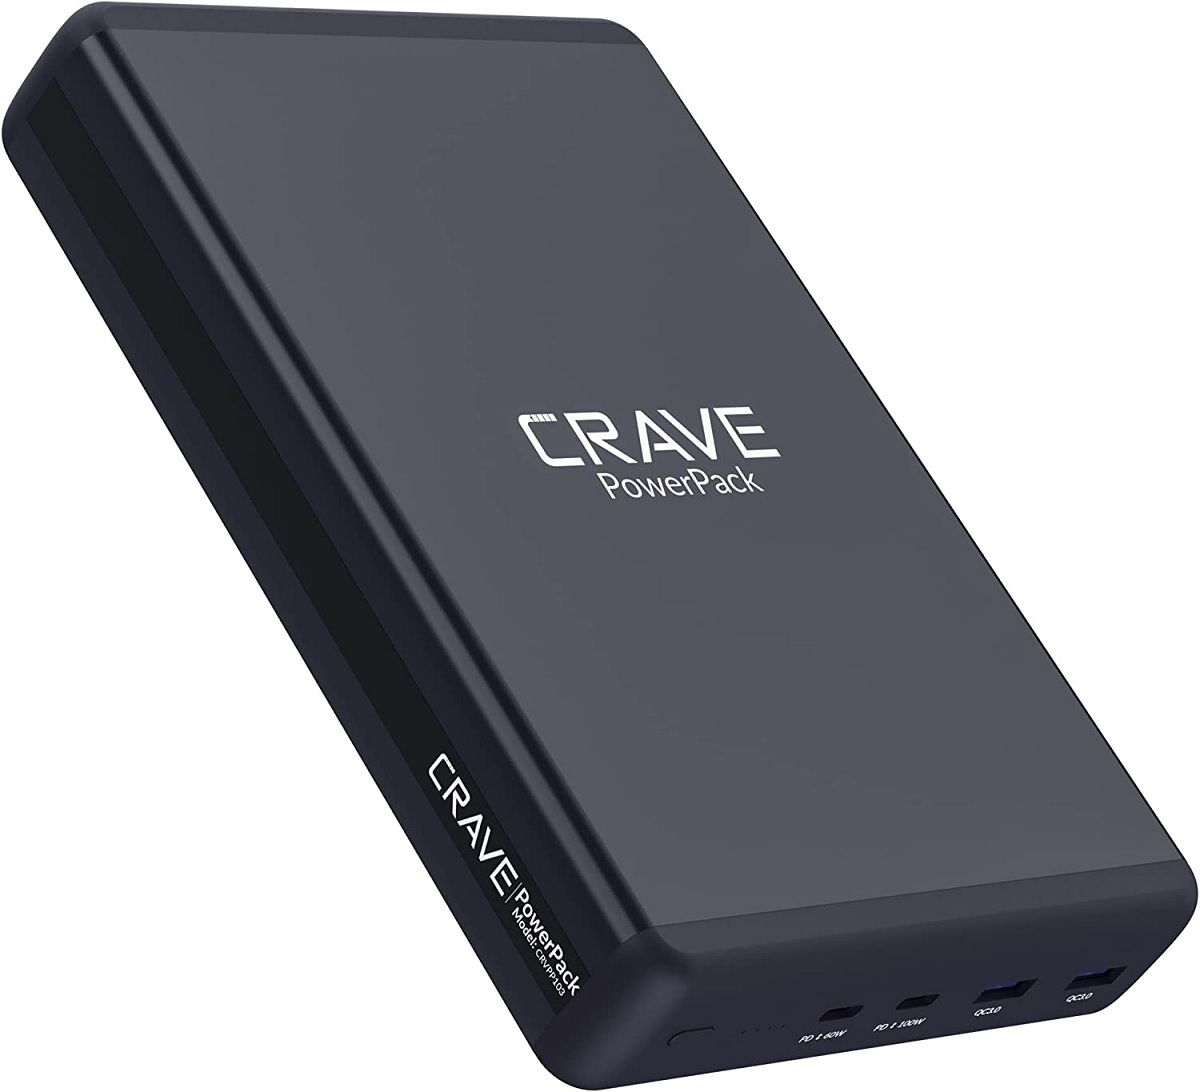 black colored crave powerpack